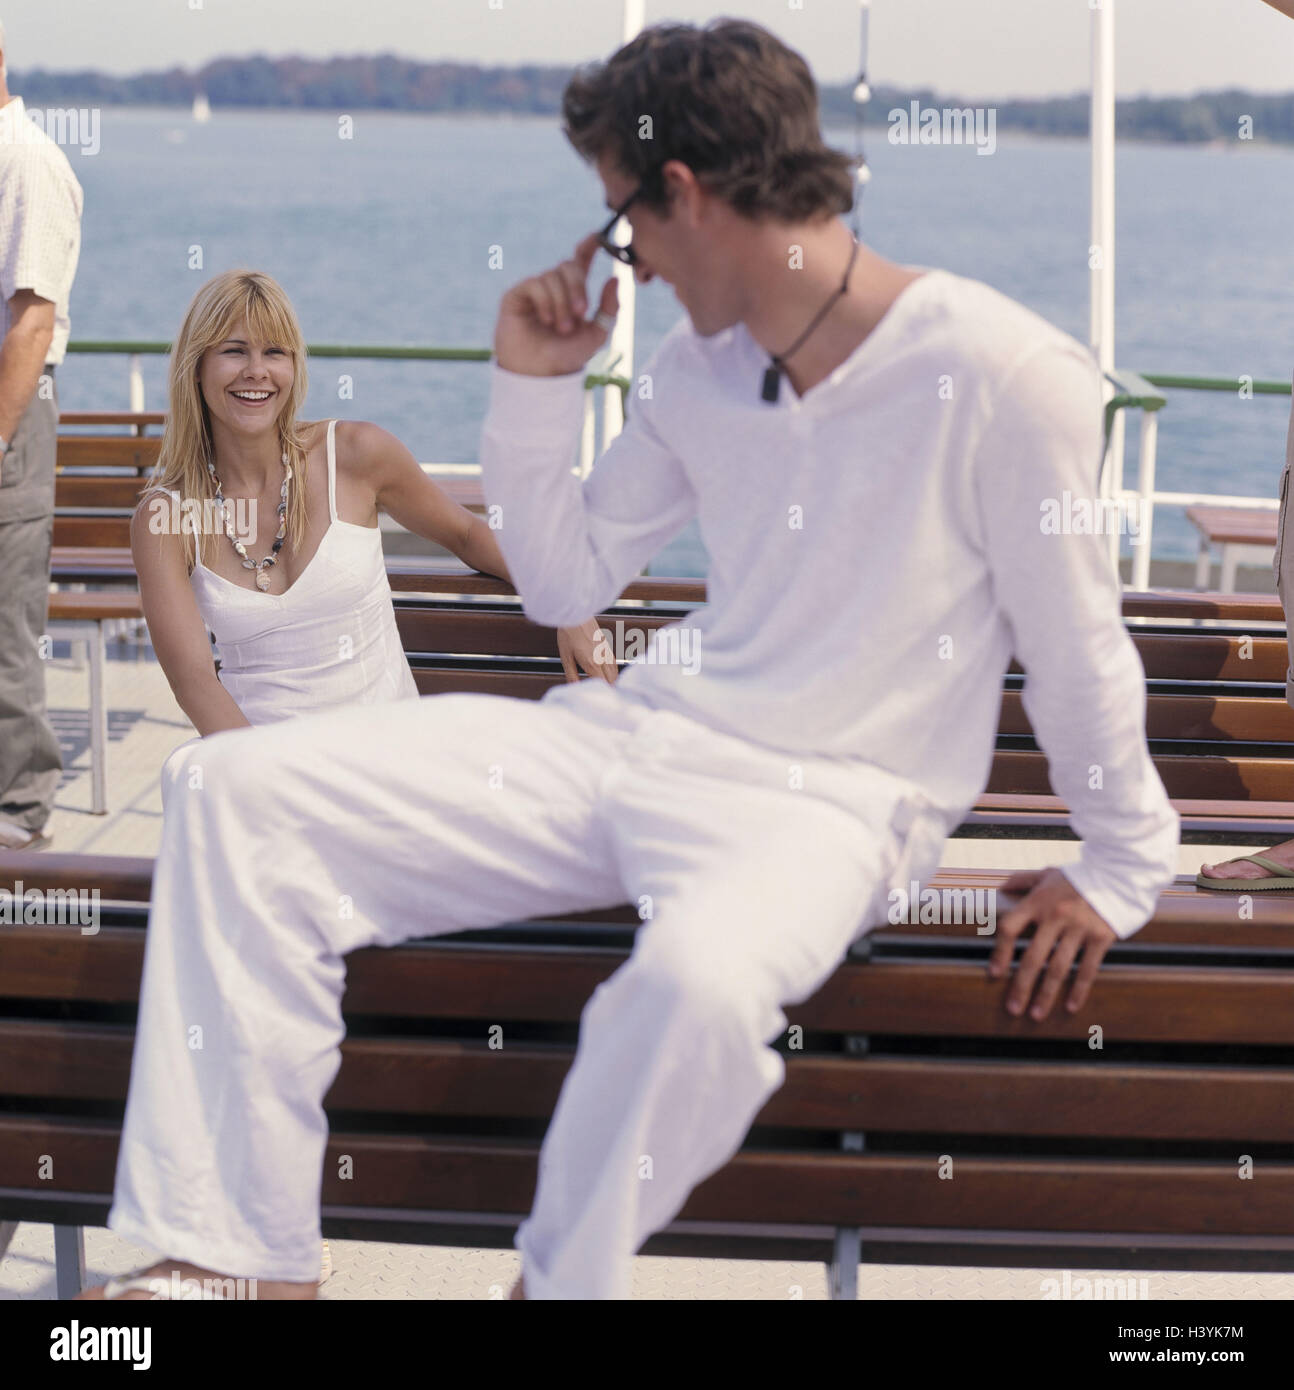 Excursion boat, deck, saddles, couple, flirtation, eye contact, vacation, leisure time, boat tour, boat trip, woman, man, clothes white, flirt, happy, joy, holiday flirtation, get to know, smile, positive mood, outside Stock Photo